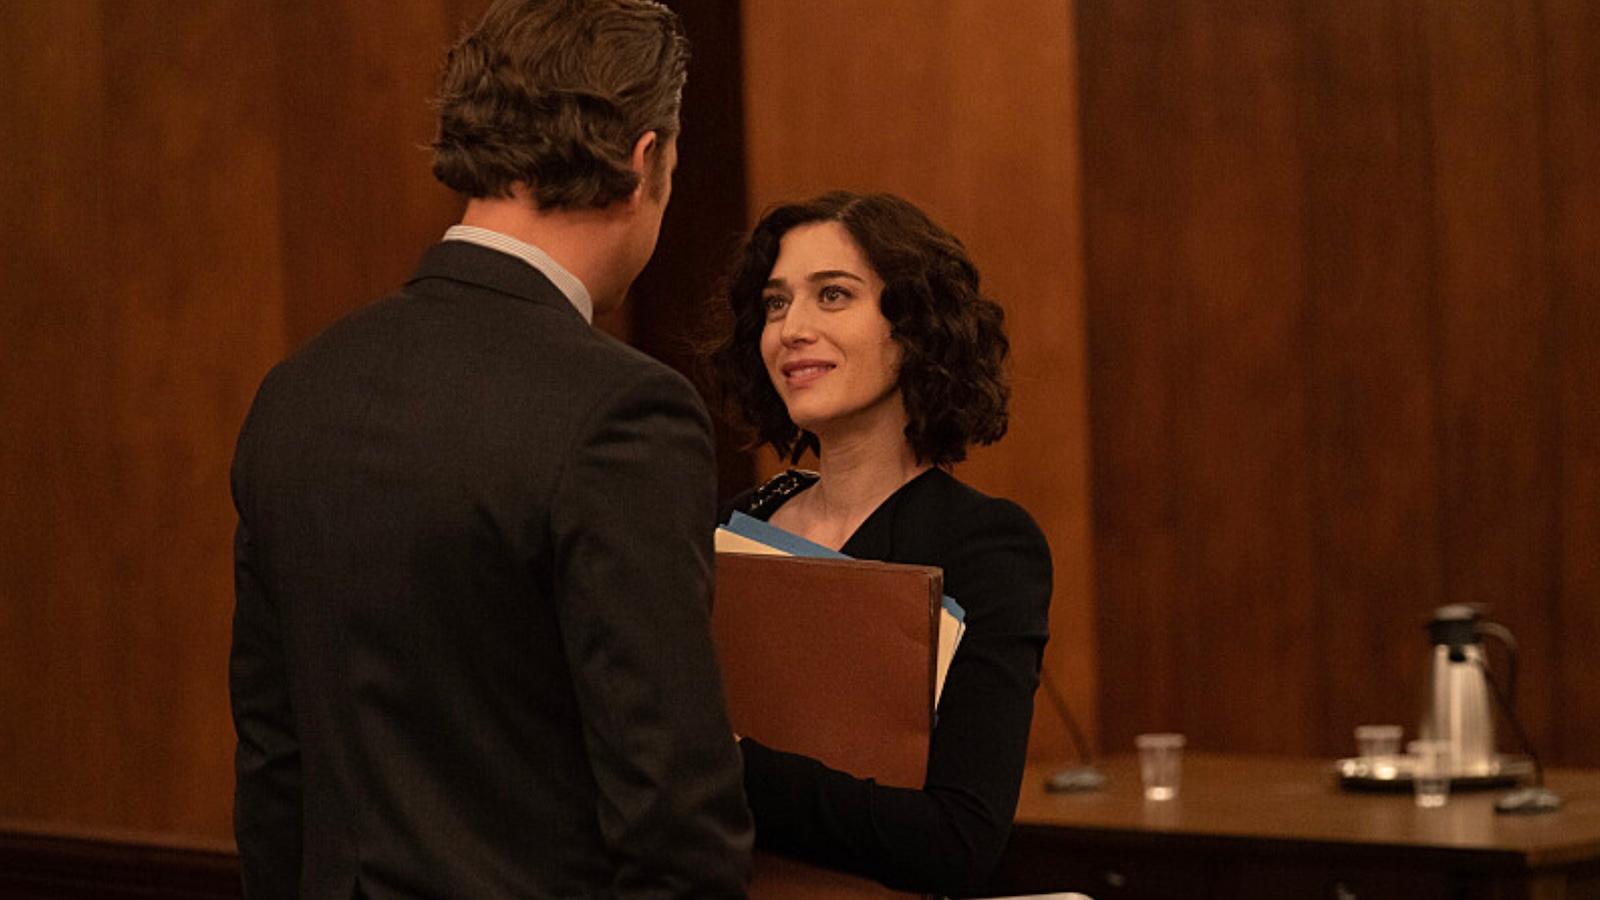 Lizzy Caplan as Alex Forrest and Joshua Jackson as Dan Gallagher in Fatal Attraction